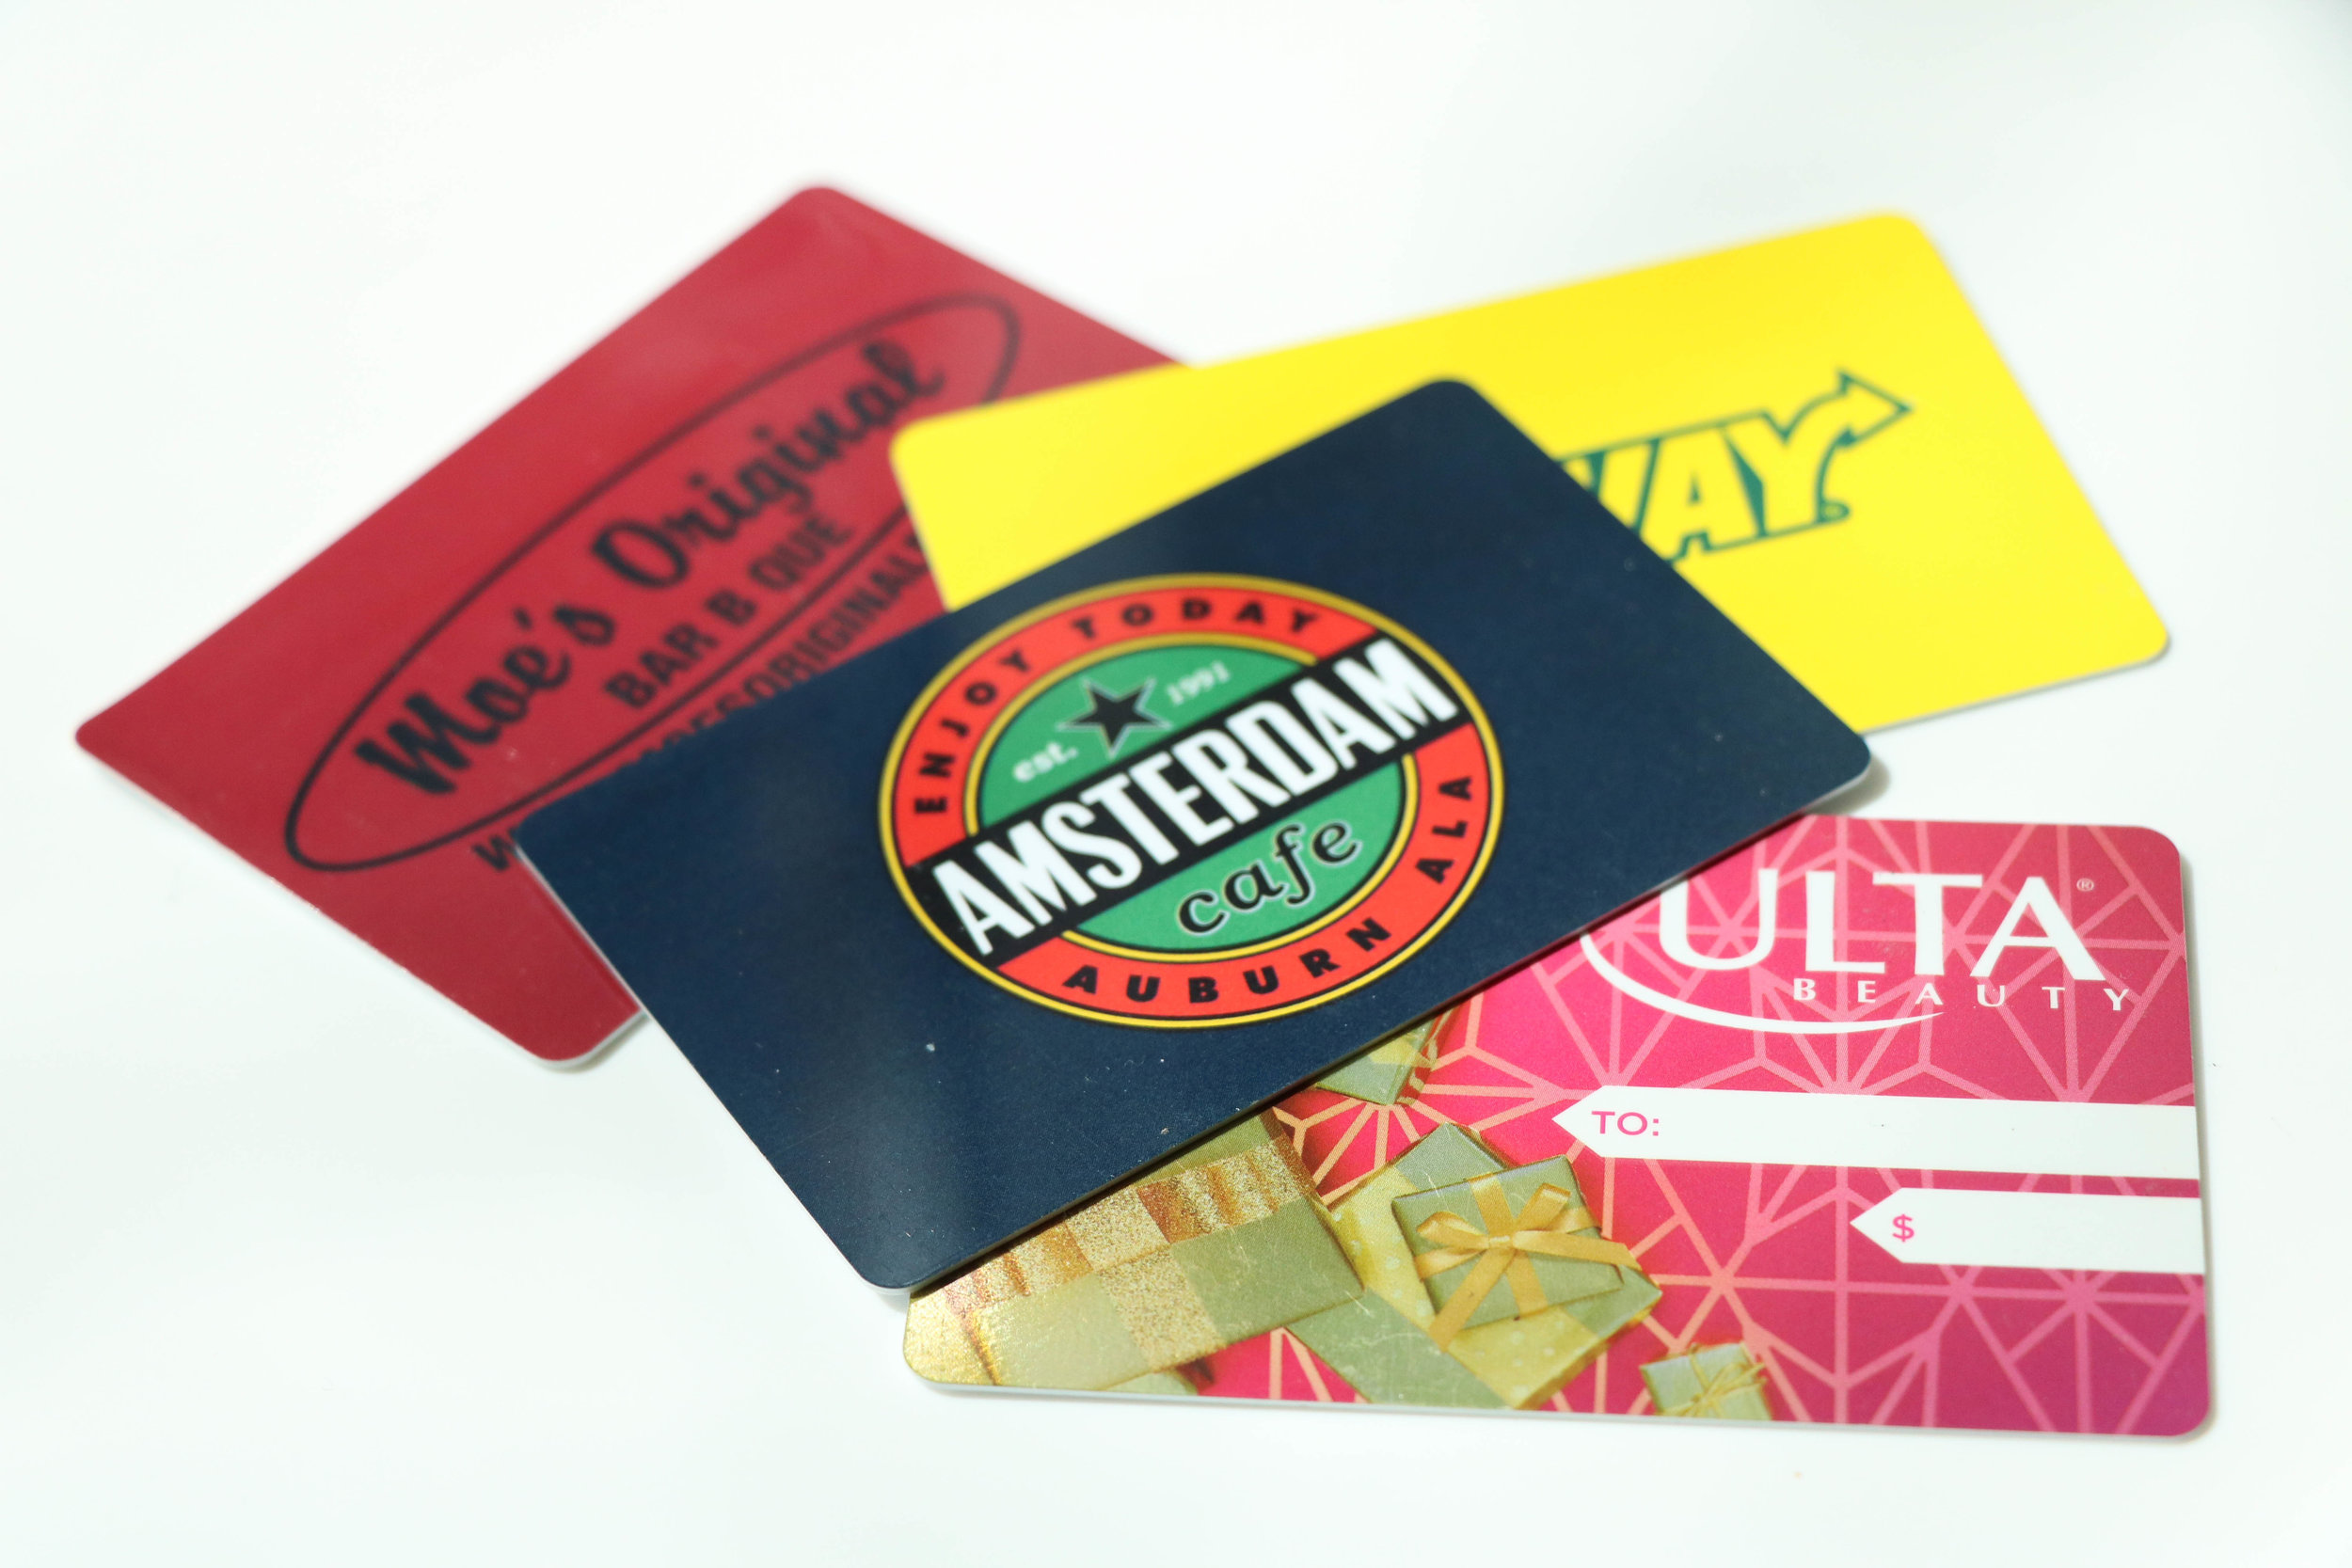  Everyone loves a great gift card. Pick their local food favorites like  Moe's Original BBQ &nbsp;or  Amsterdam Cafe  so you can tag along! 